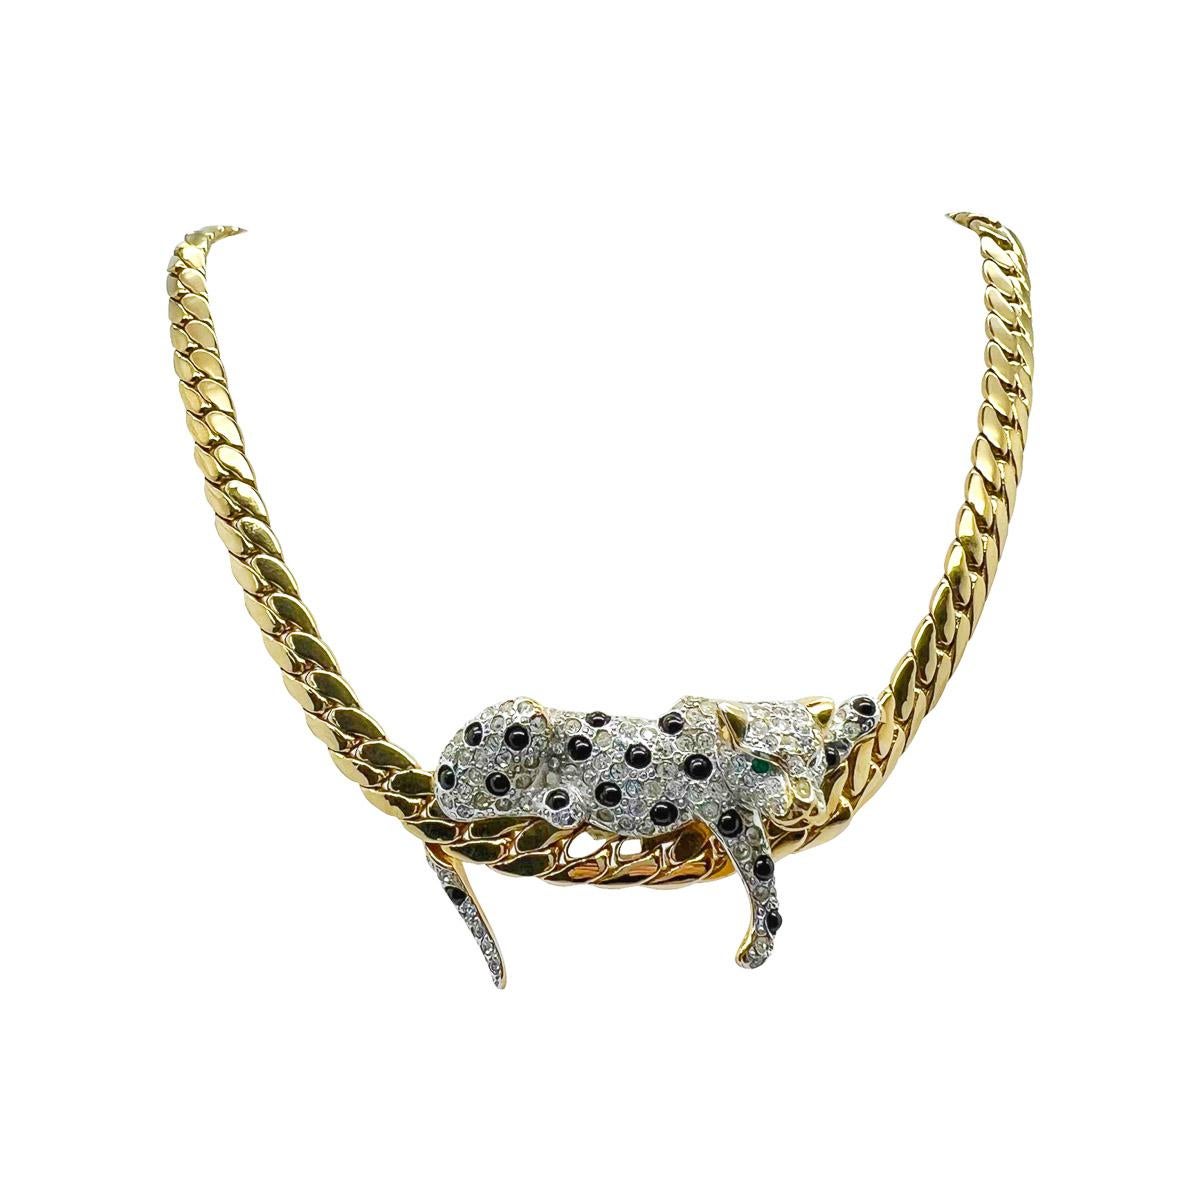 A fabulous Vintage Reclining Big Cat Necklace. A leopard lounges along the chunky lustrous links of this 1980s necklace. The perfect edgy style piece.
An unsigned beauty. A rare treasure. Just because a jewel doesn’t carry a designer name, doesn’t